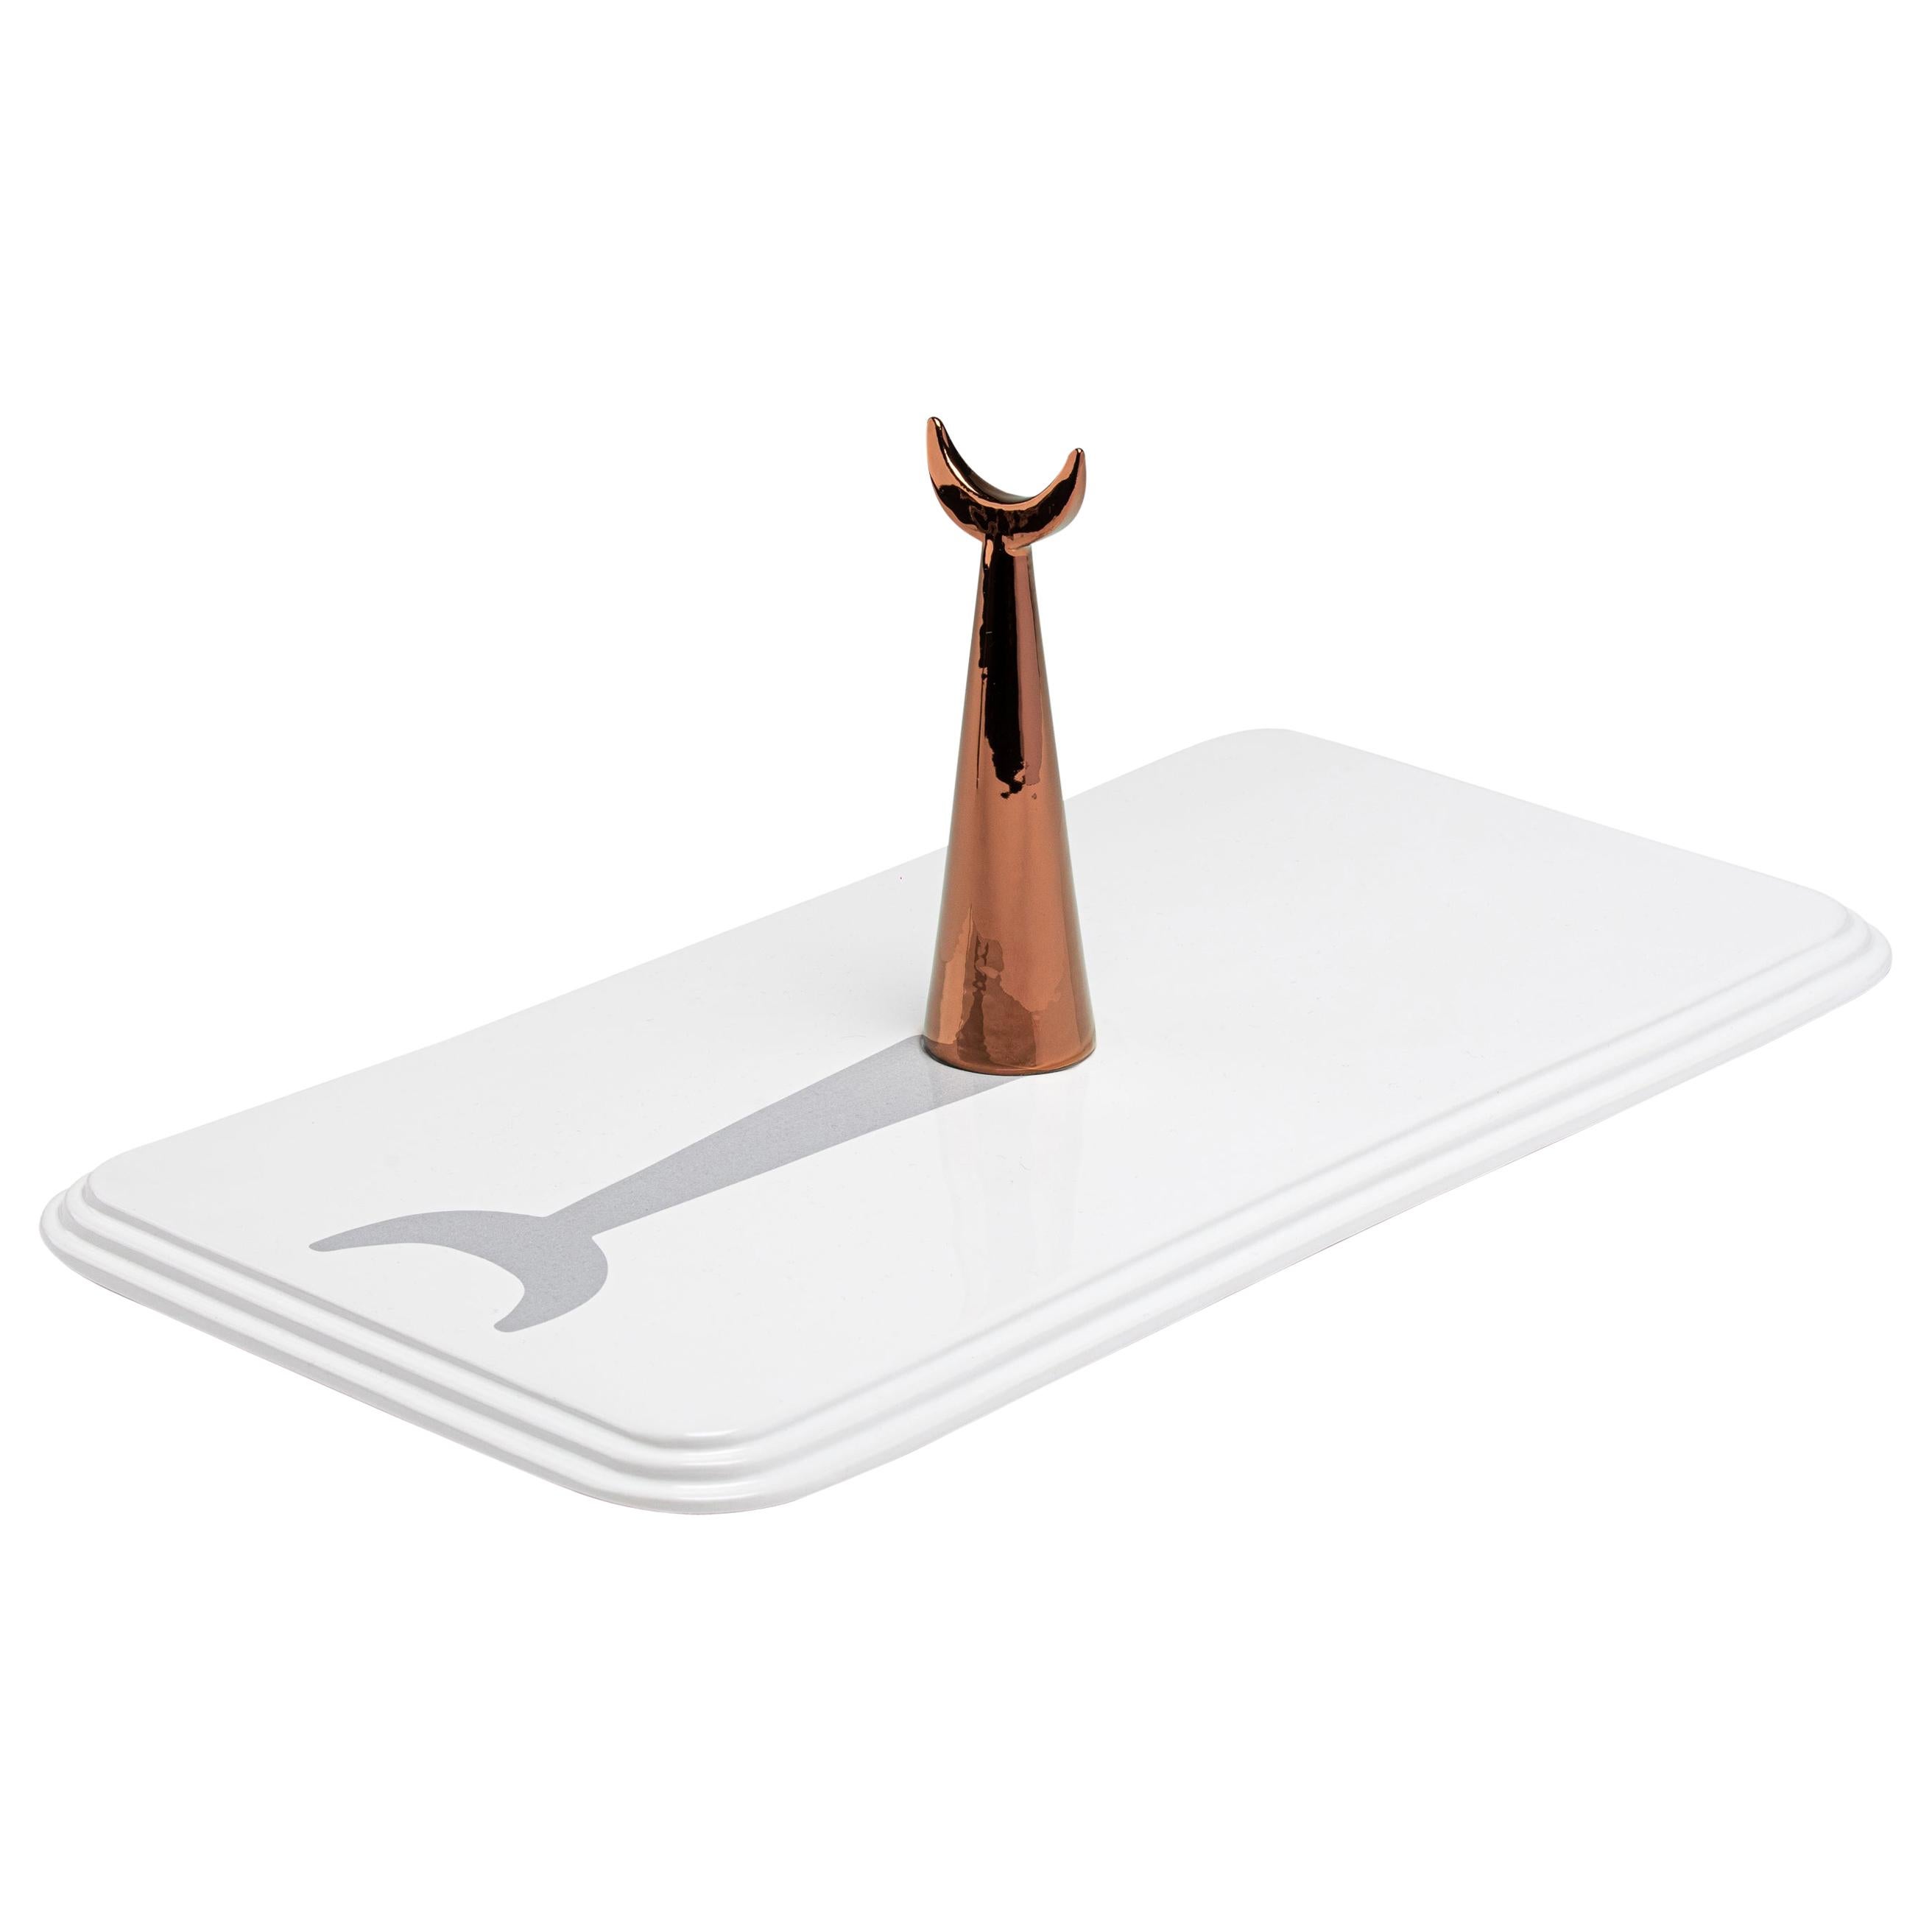 19:00 _ White Ceramic and Copper Gold Details Handcrafted Rectangular Tray